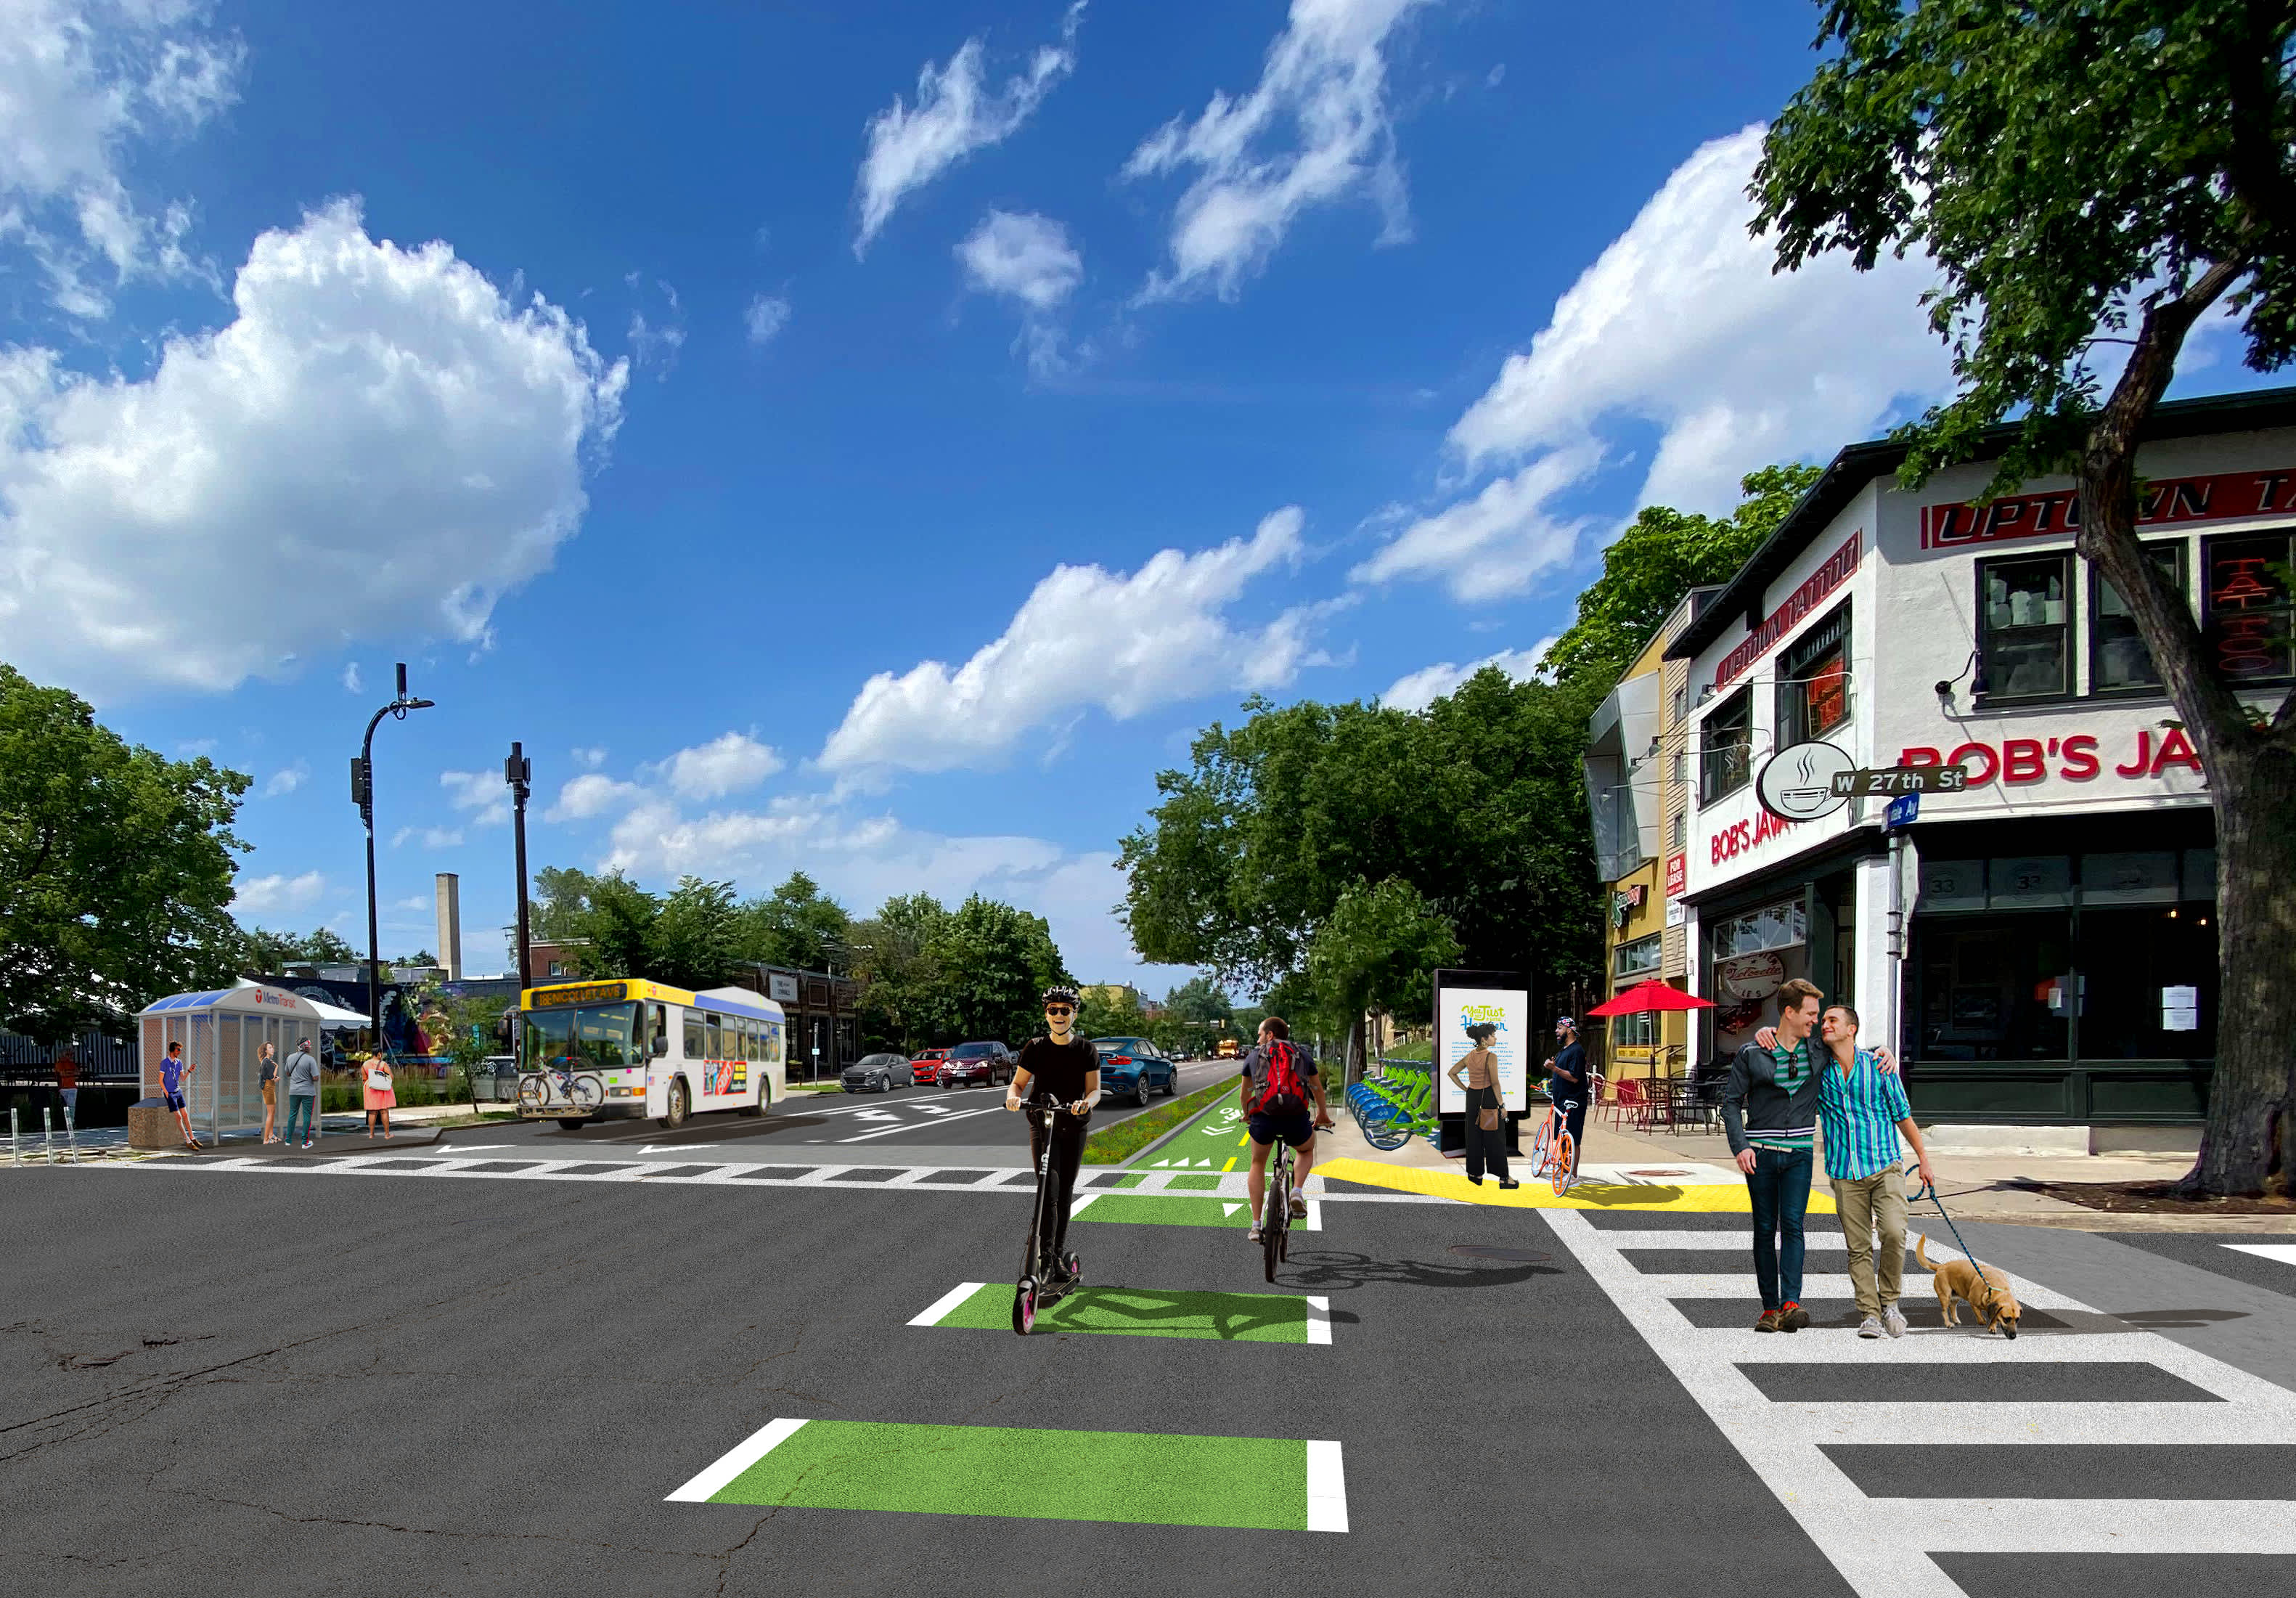 Proposed Resilient Street renderings in Columbus, Washington D.C., Minneapolis, Queens, Chicago, and Somerville. Developed by Street Plans.